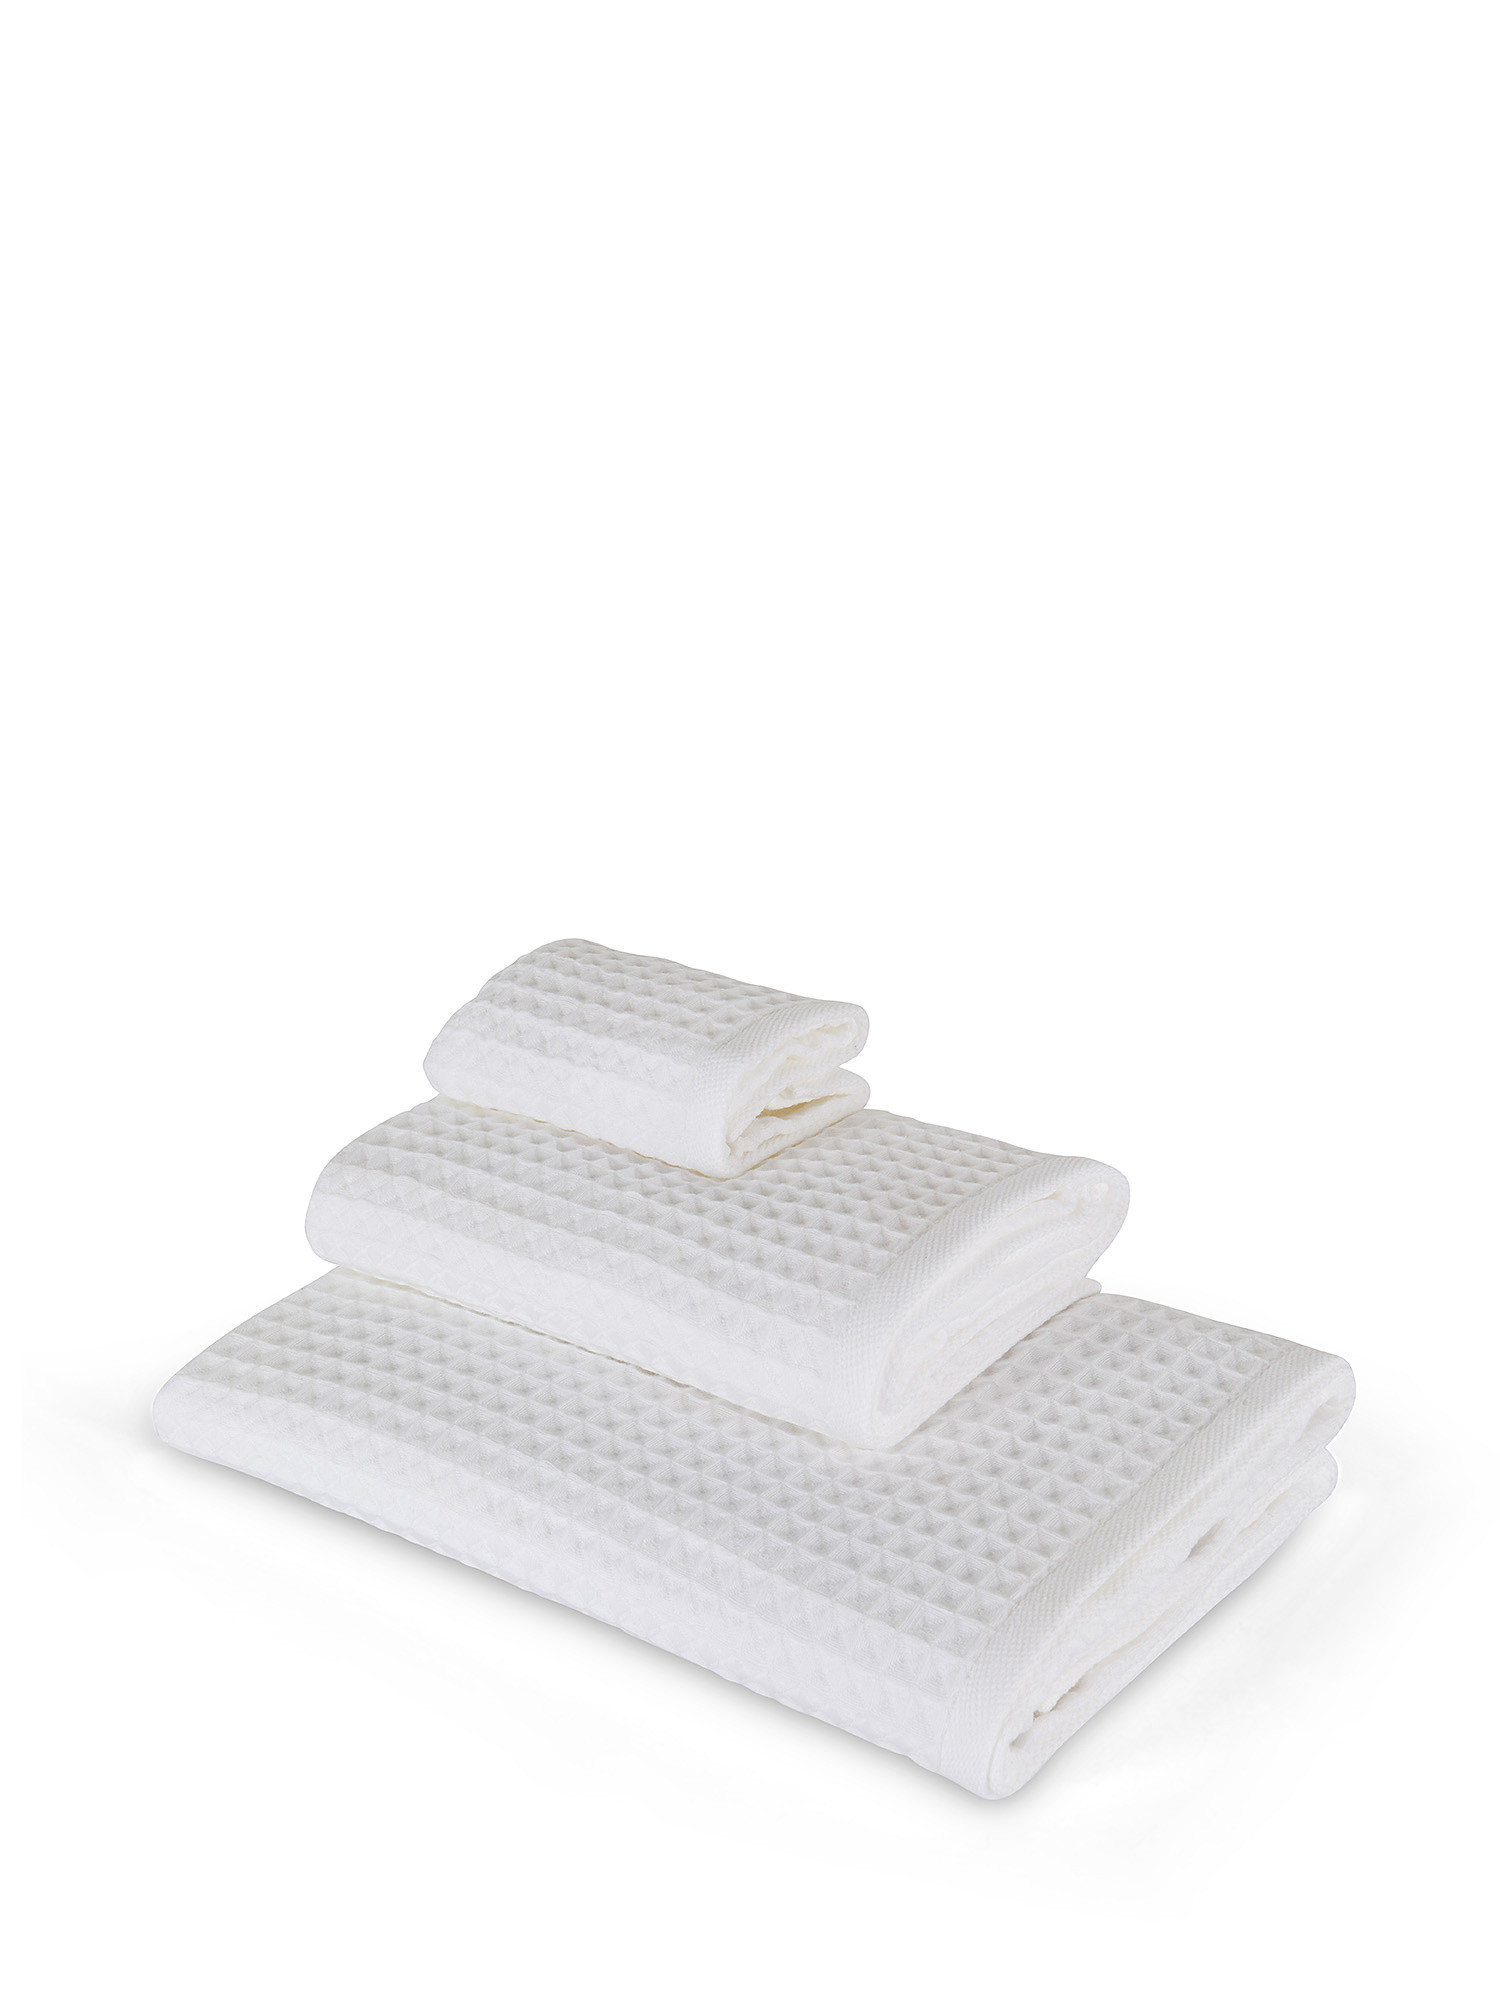 Thermae waffle weave towel, White, large image number 0